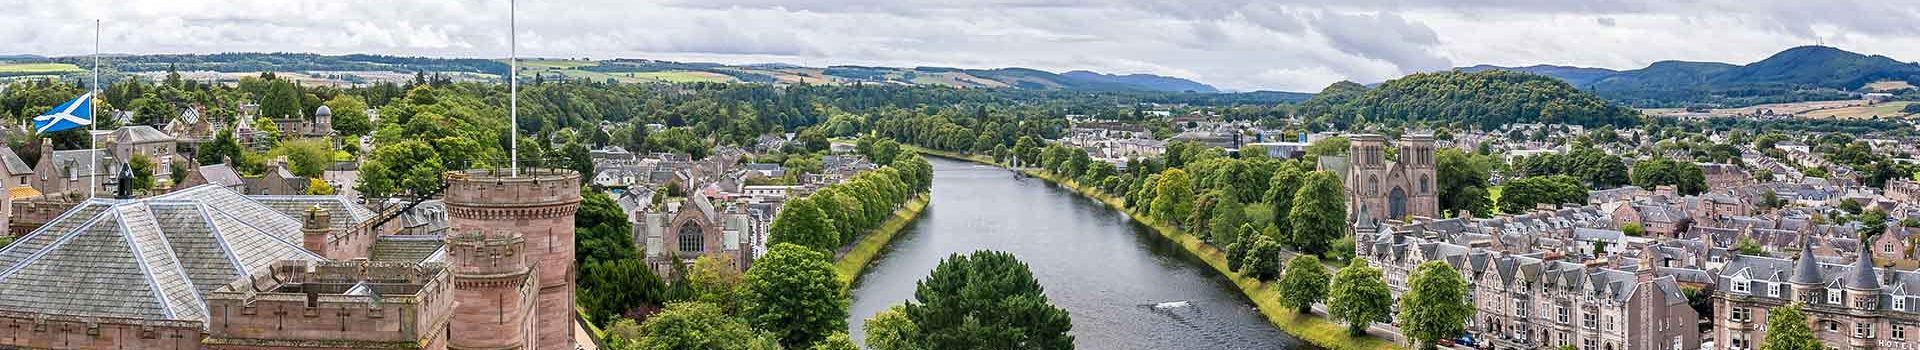 Ariel view of the River Ness and Inverness